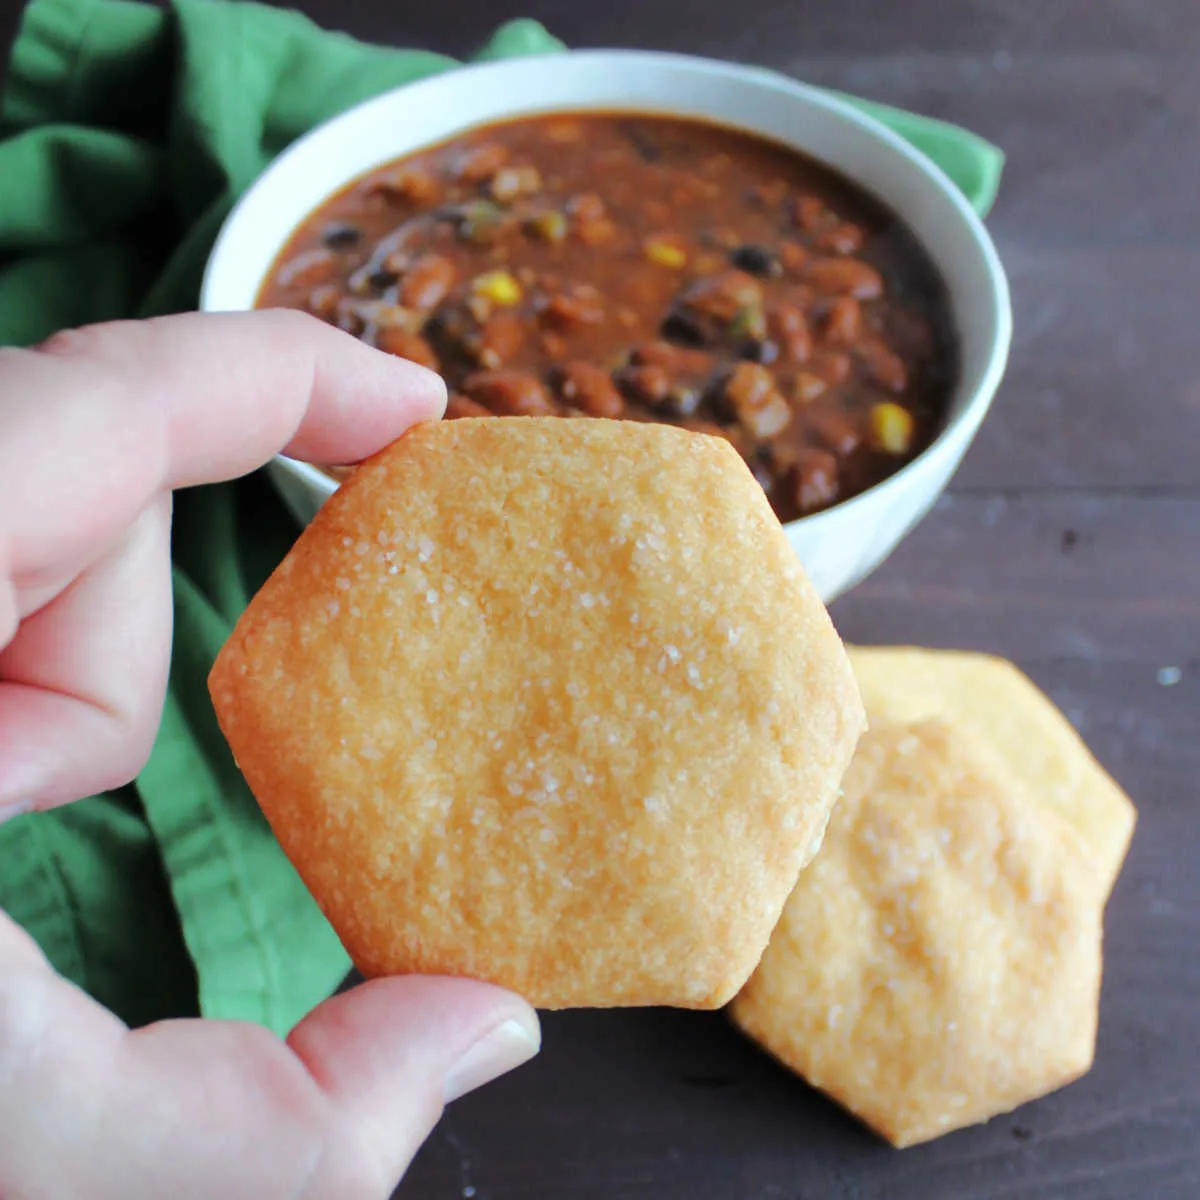 Hand holding cheese cracker in front of bowl of chili.